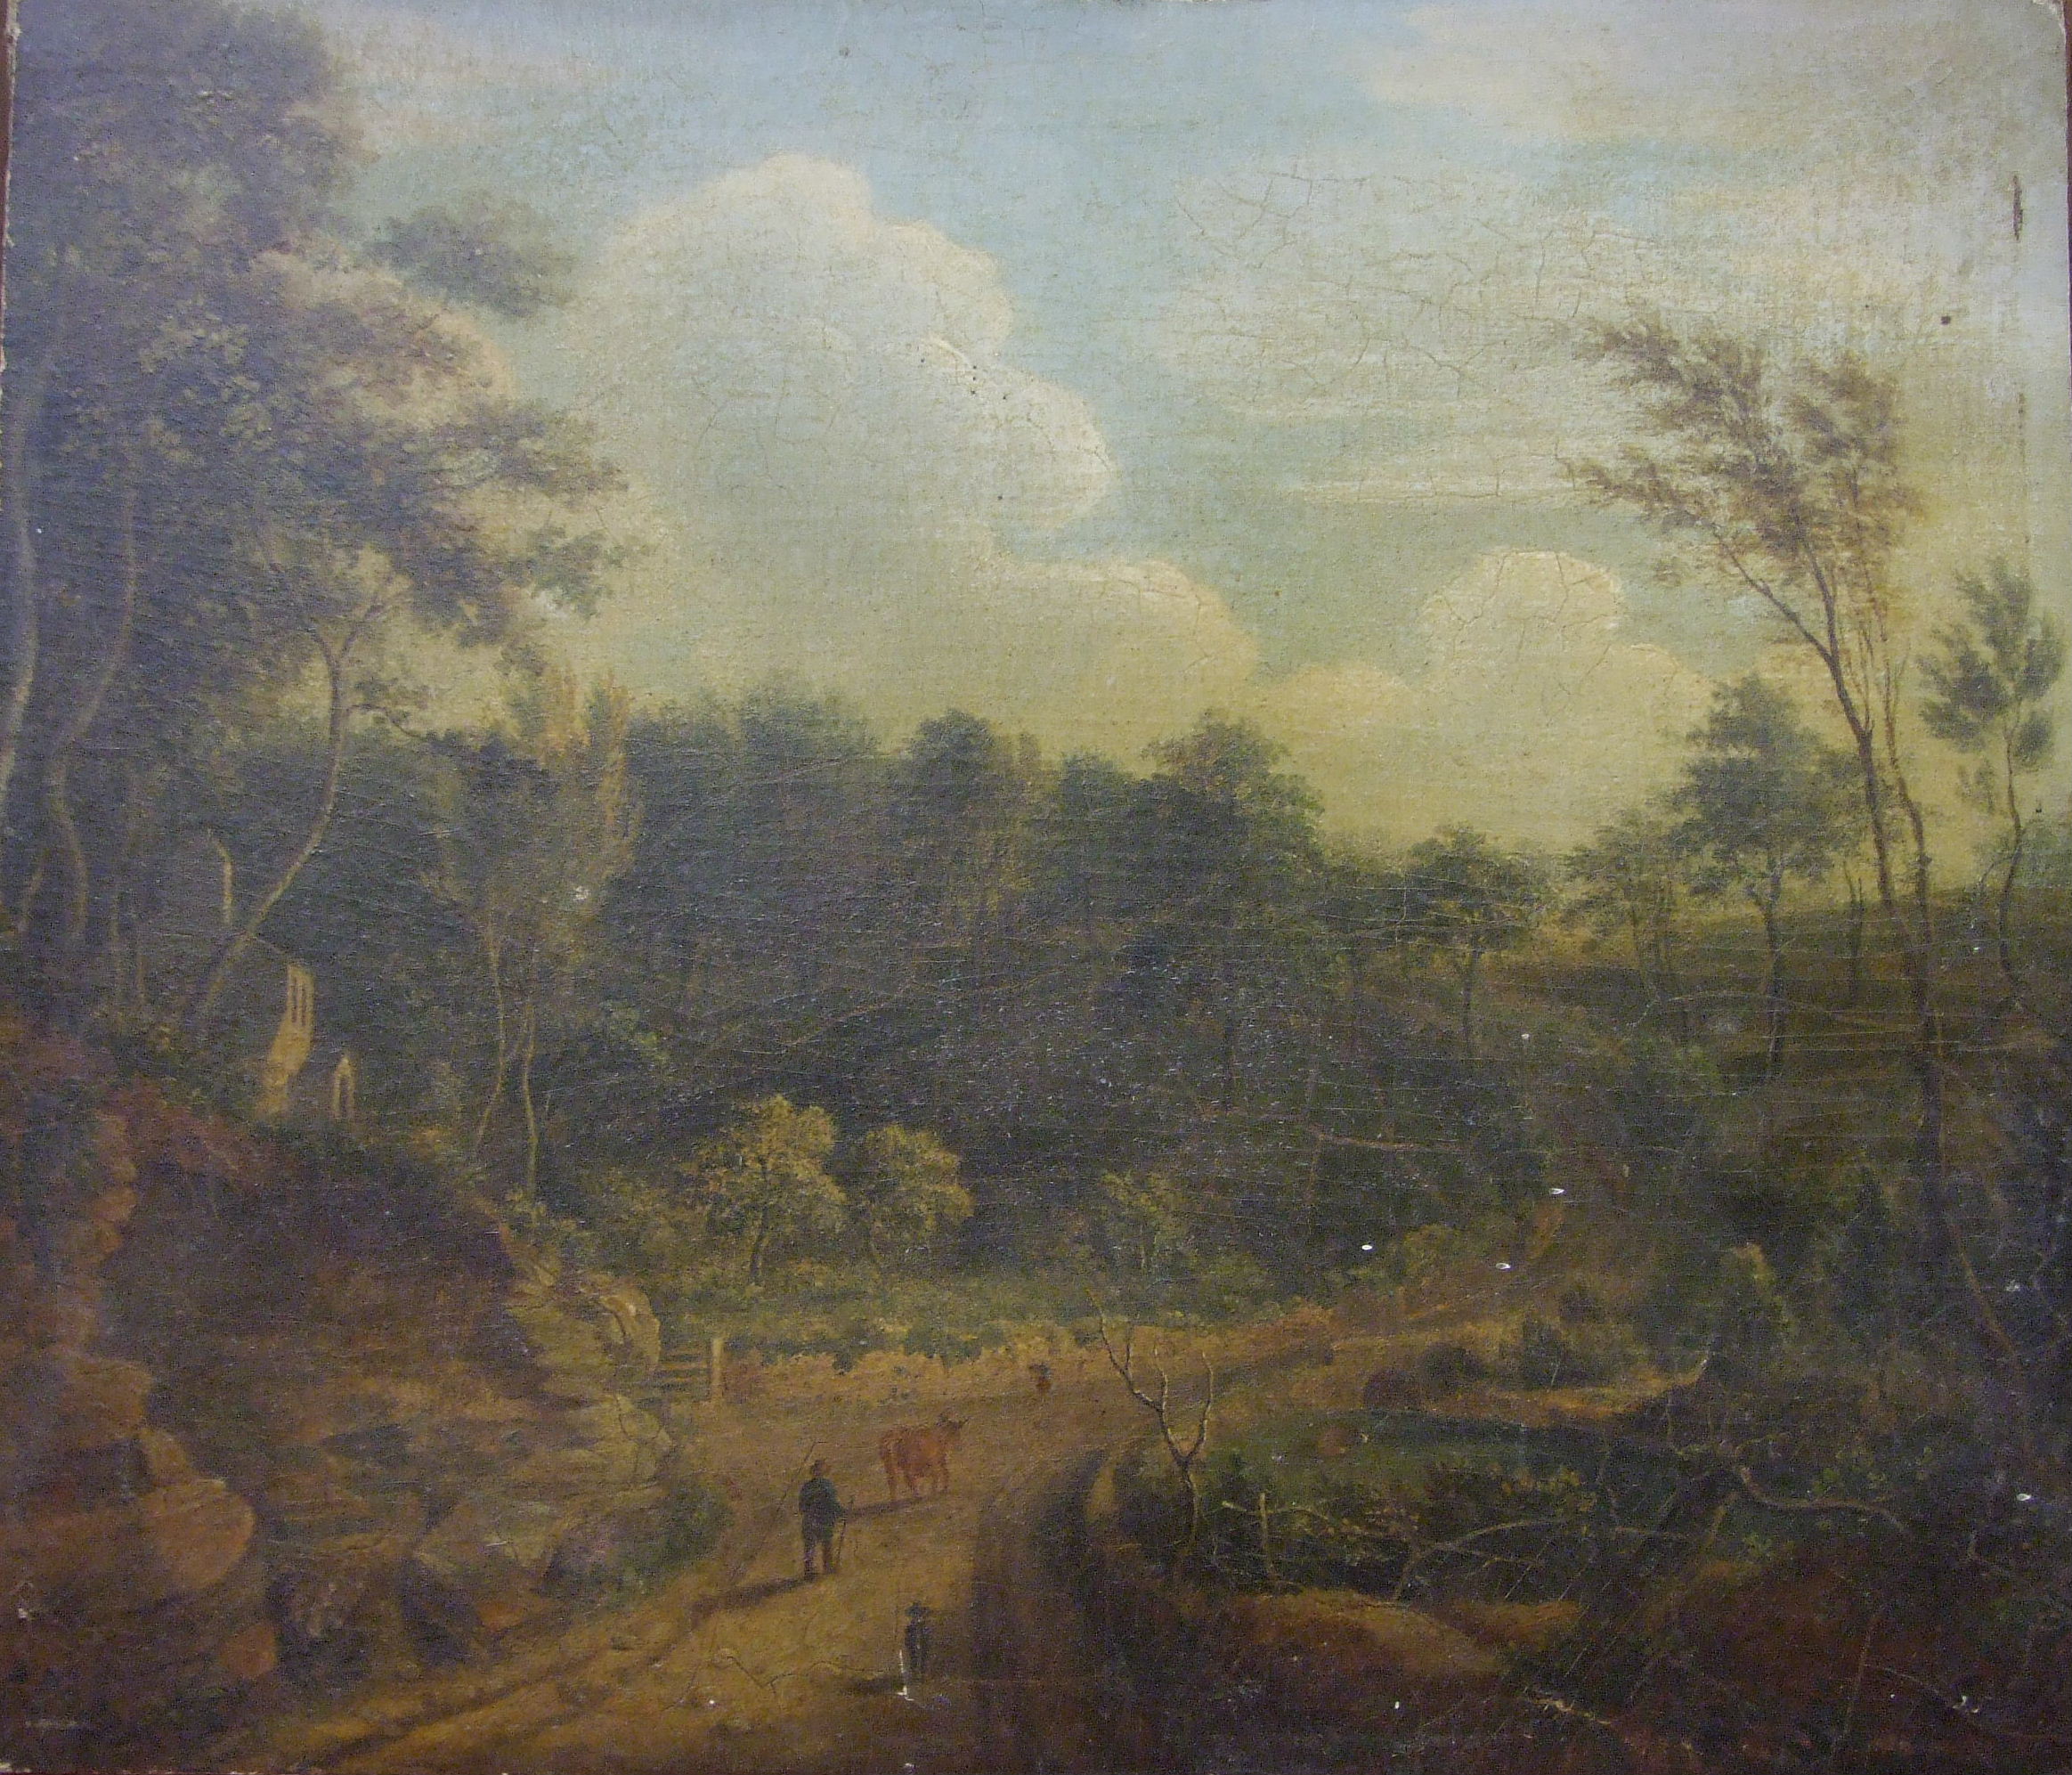 JW, 19th century English School FIGURES, CATTLE AND A DOG IN A COUNTRY LANE Monogrammed oil on